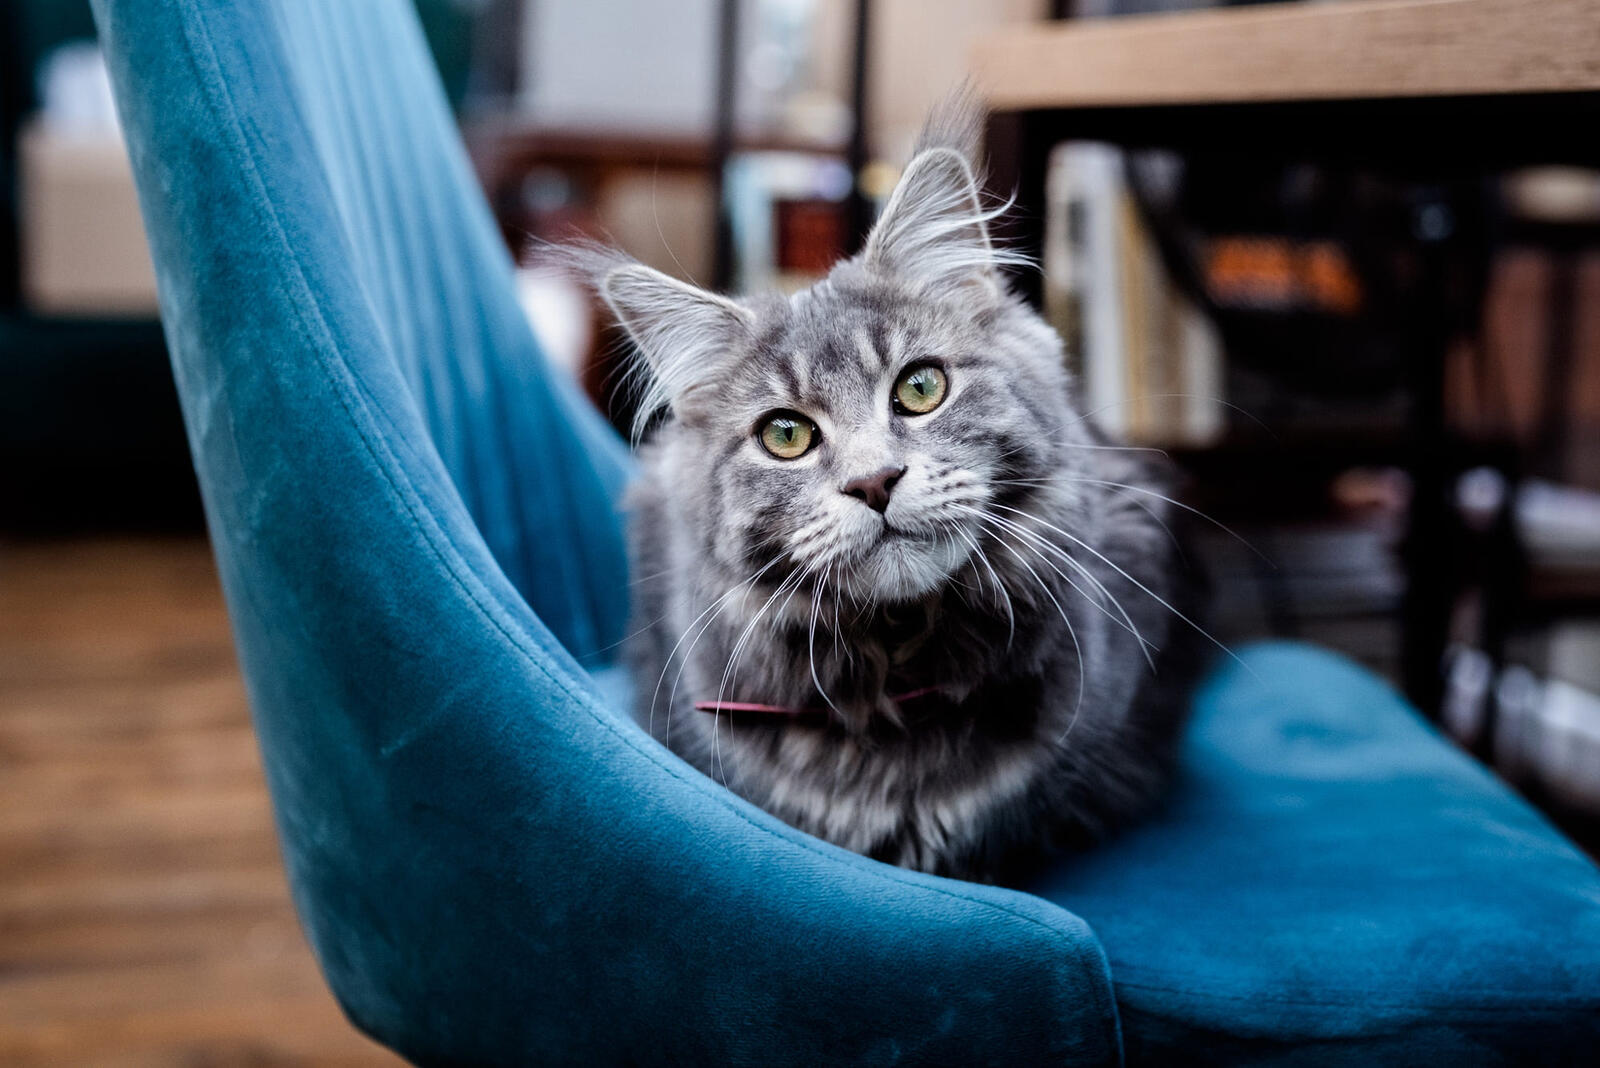 Free photo A gray Maine Coon cat lies on a blue armchair